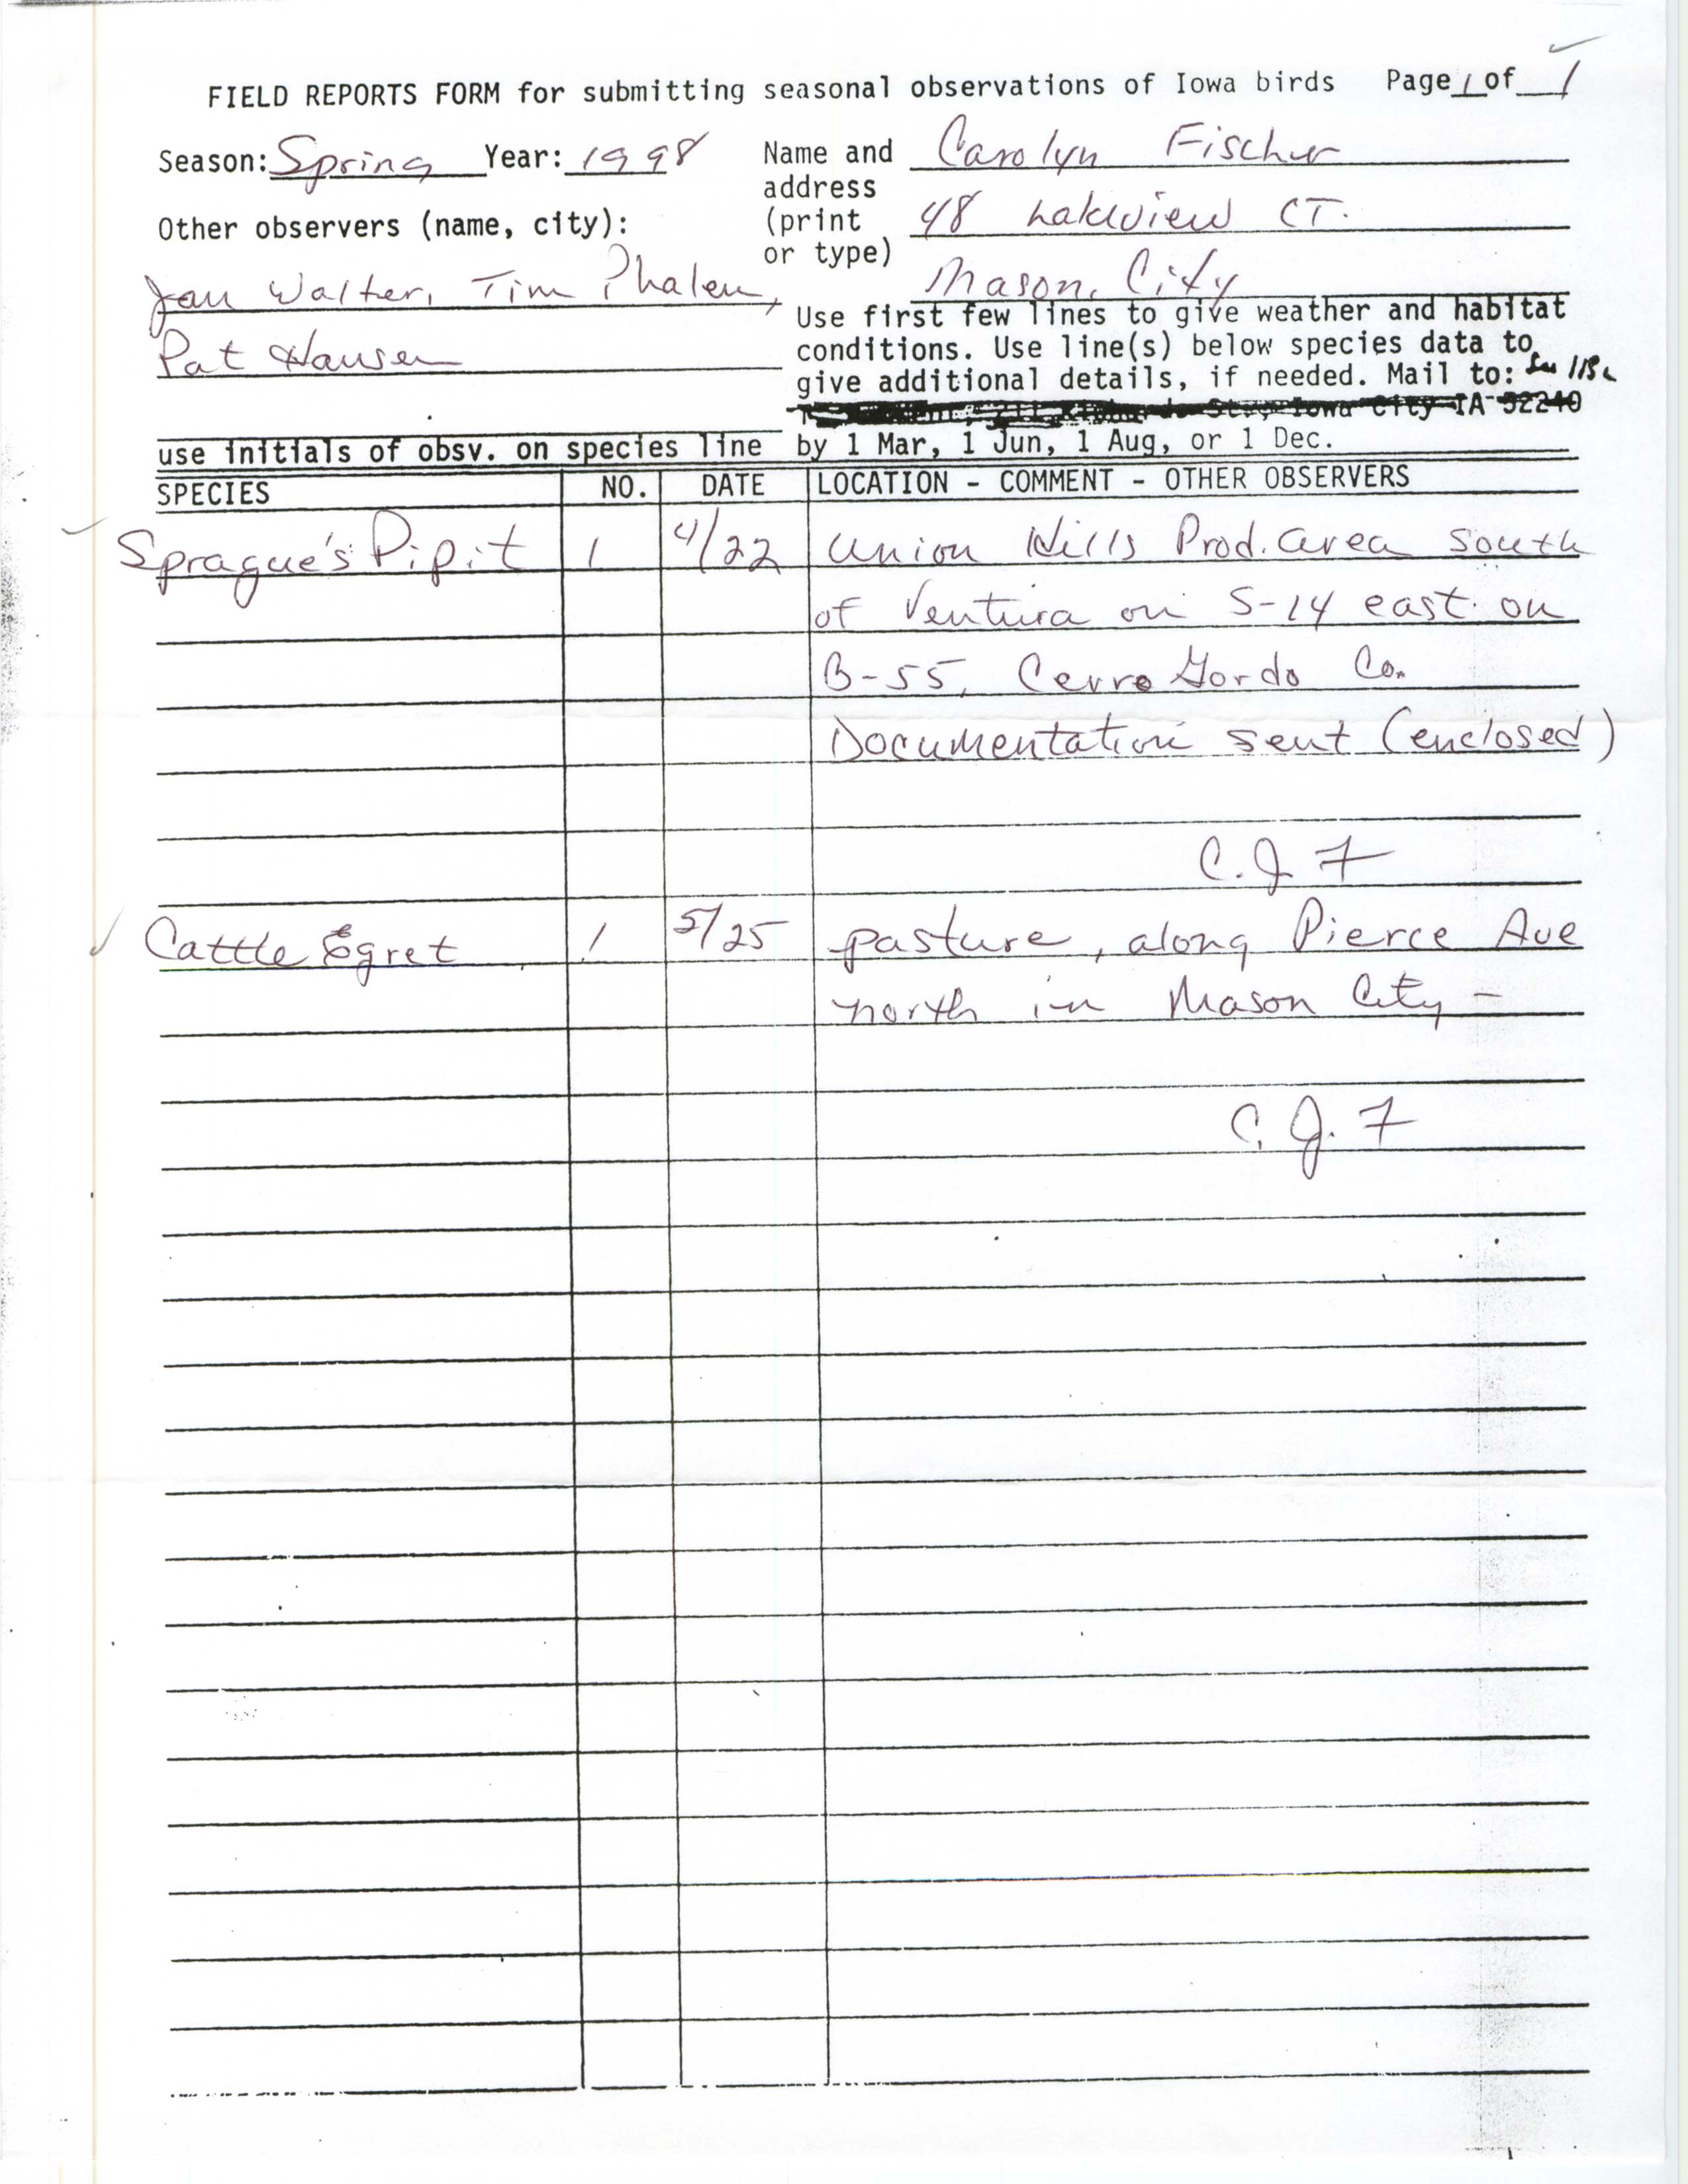 Field reports form for submitting seasonal observations of Iowa birds, Carolyn Fischer, spring 1998